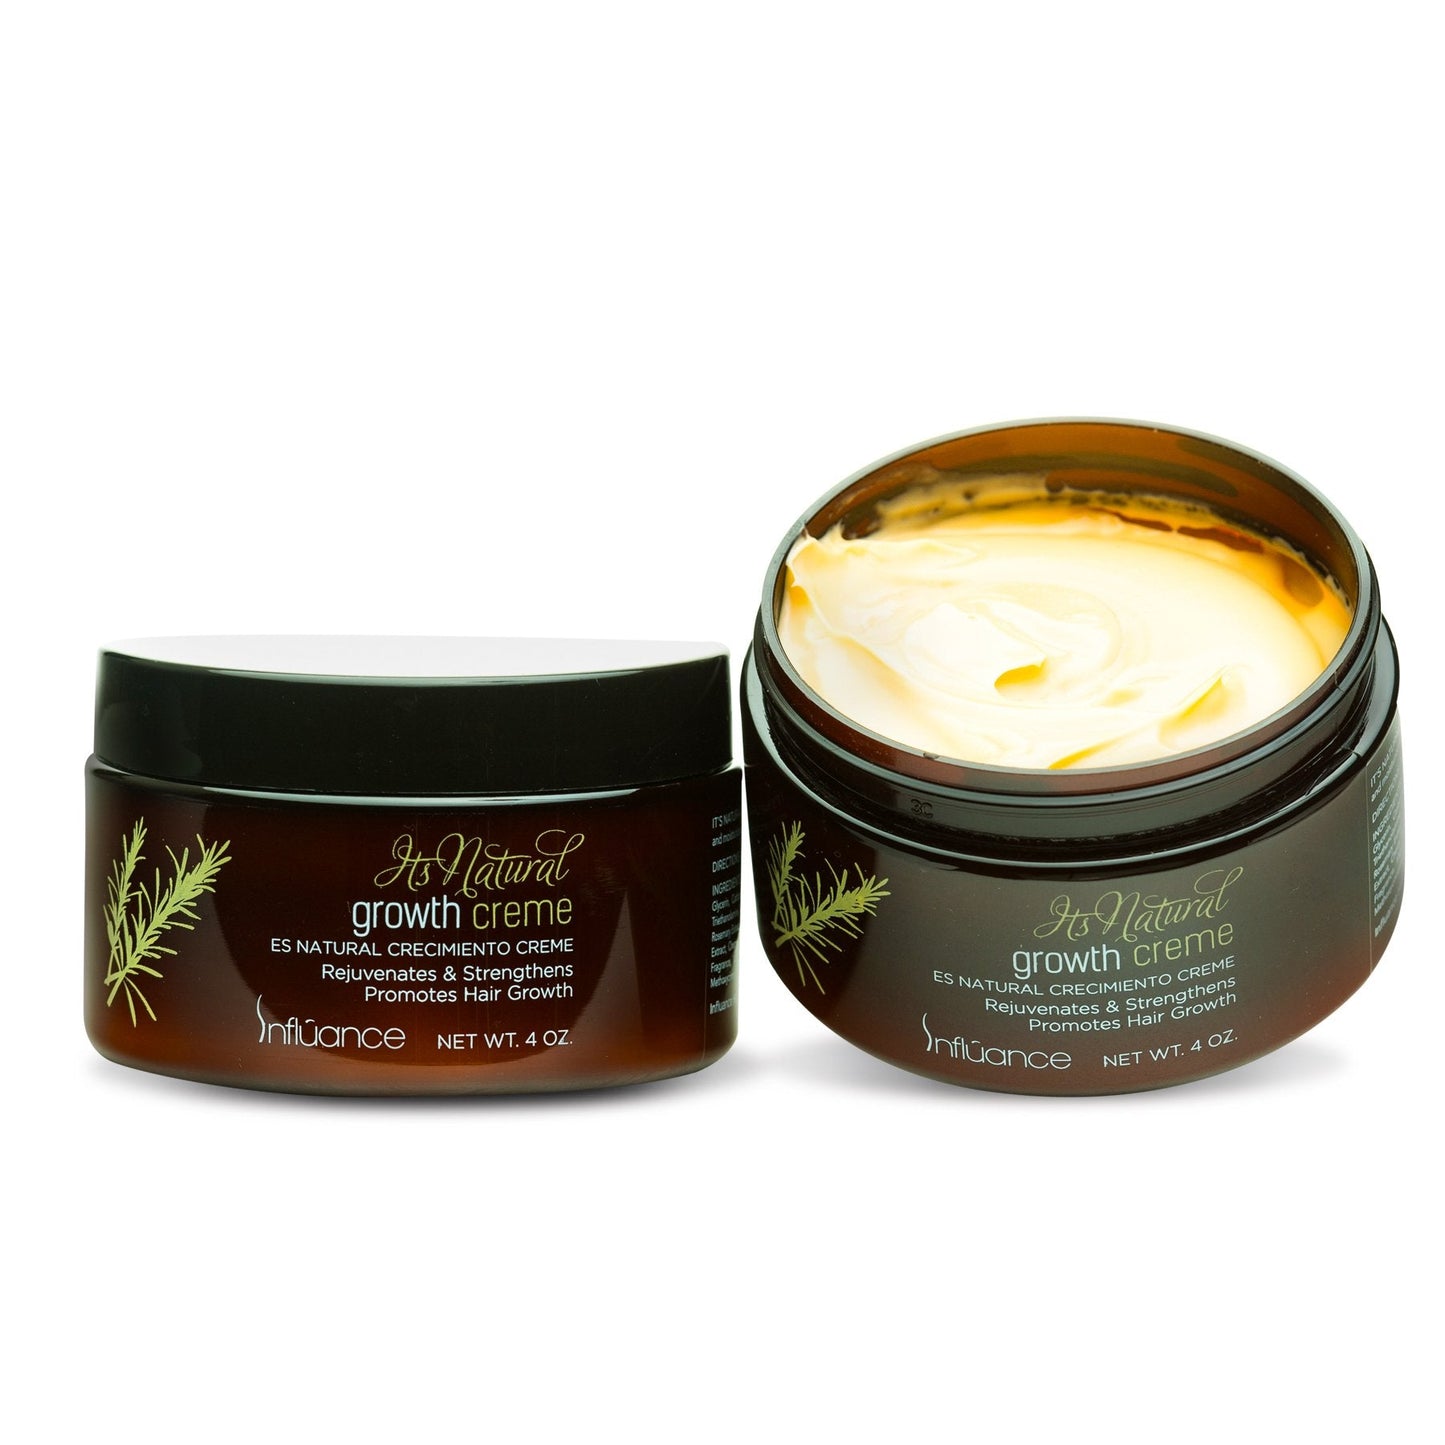 Influance It's Natural Growth Creme 2 PACK